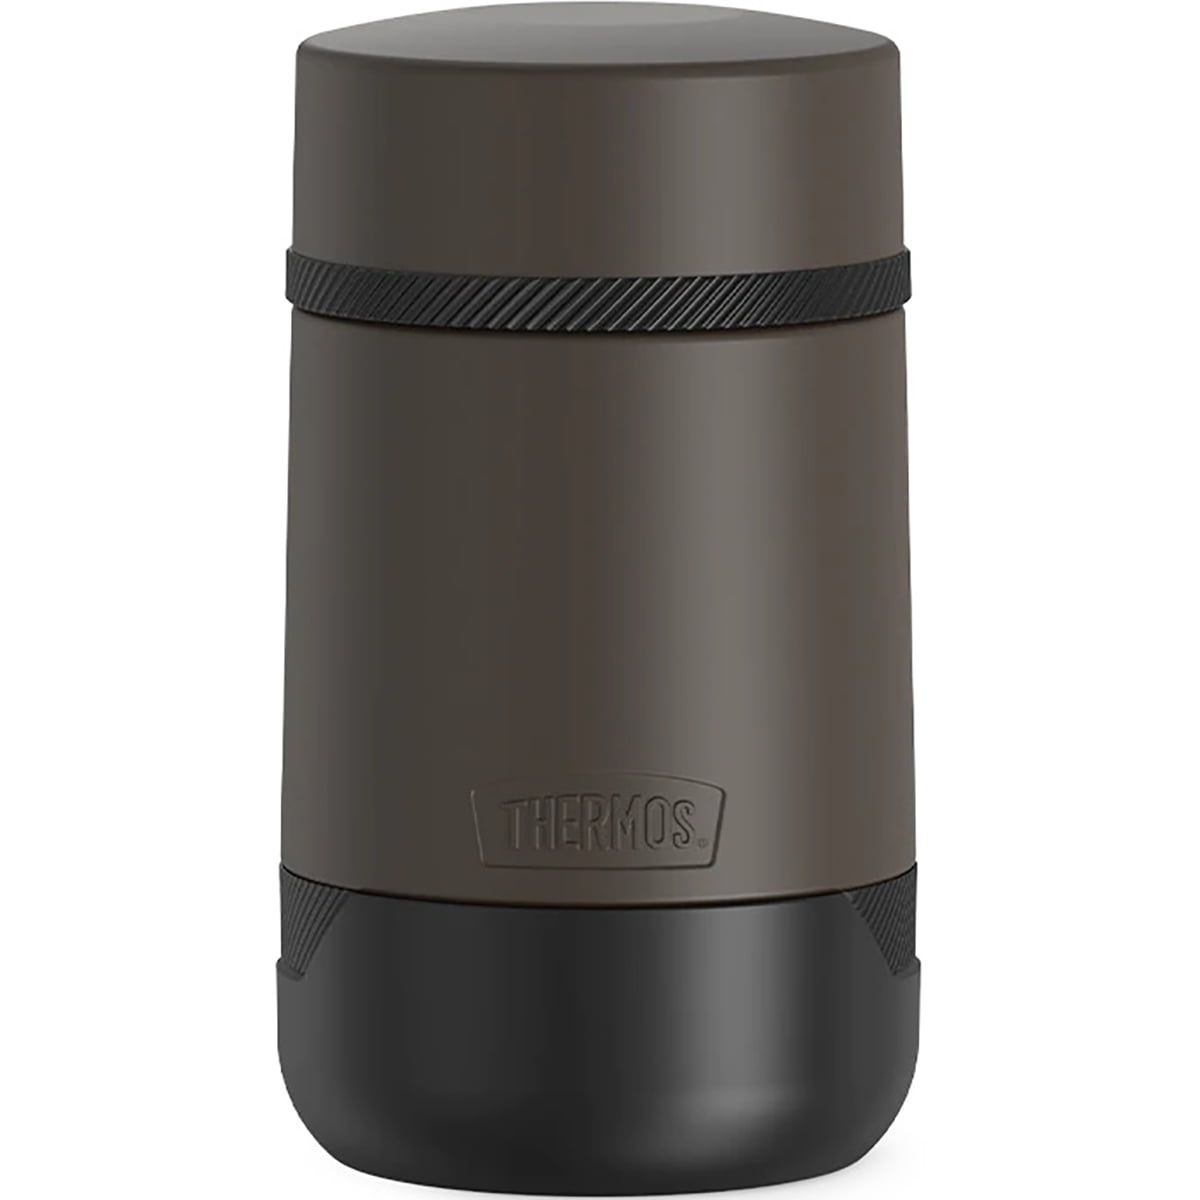  JCAKES Food Thermos Hot Food Thermos Thermos for Food